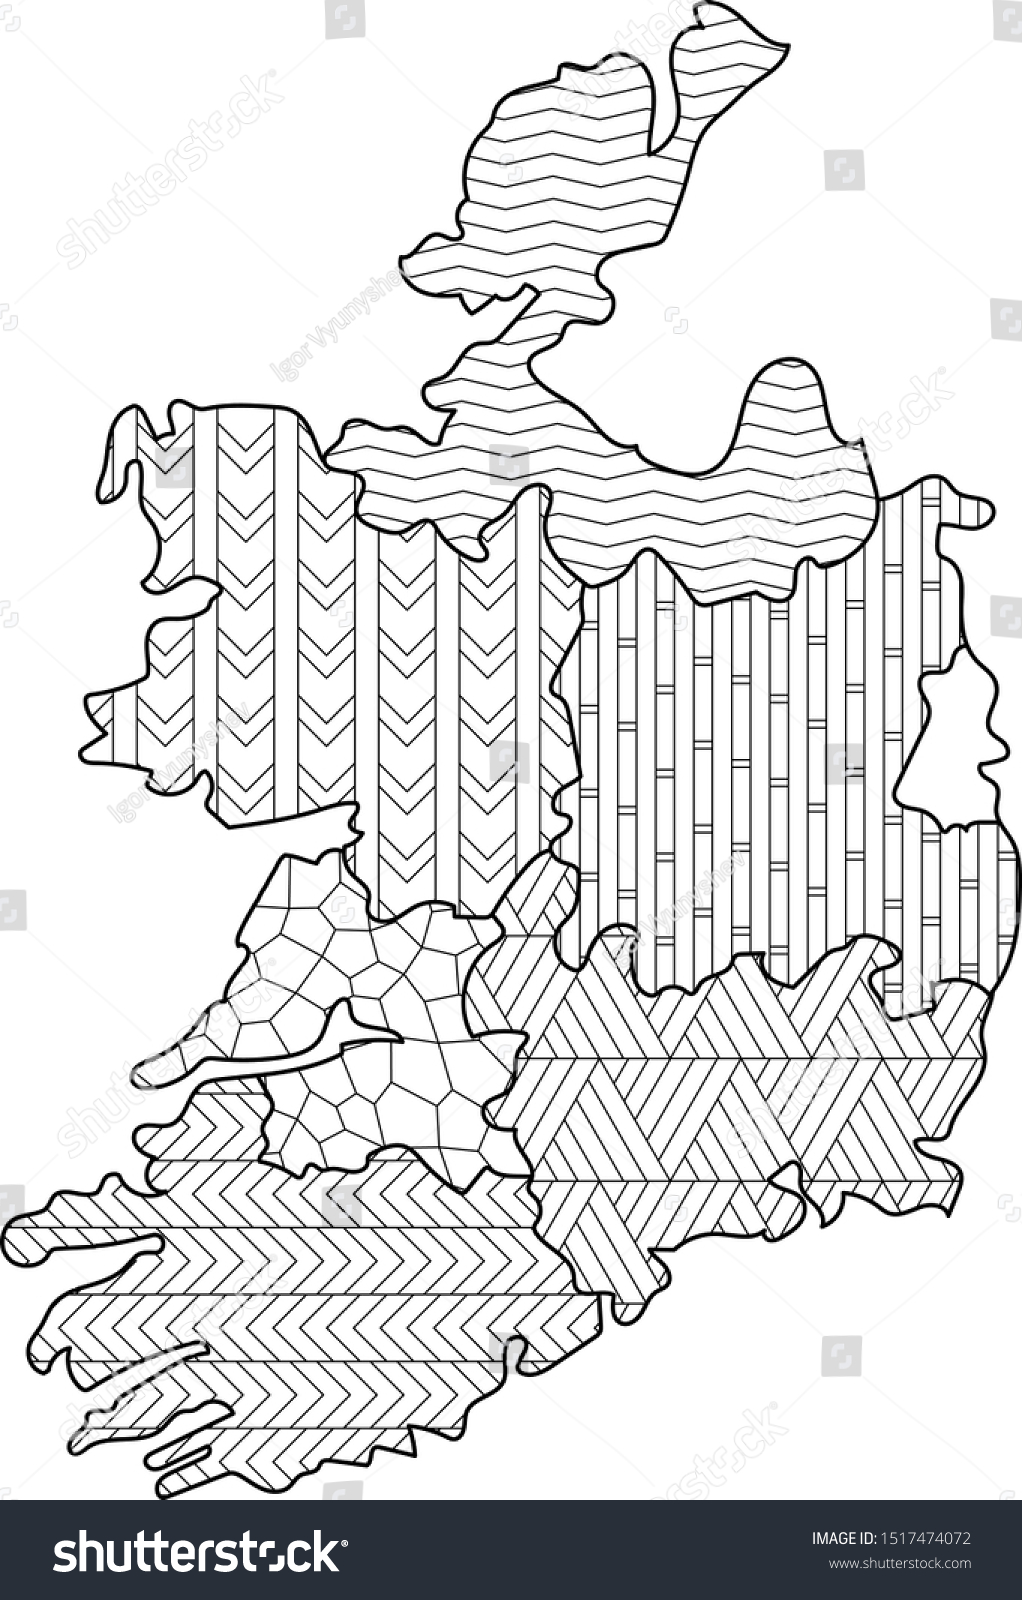 Coloring page ireland map administrative division stock vector royalty free